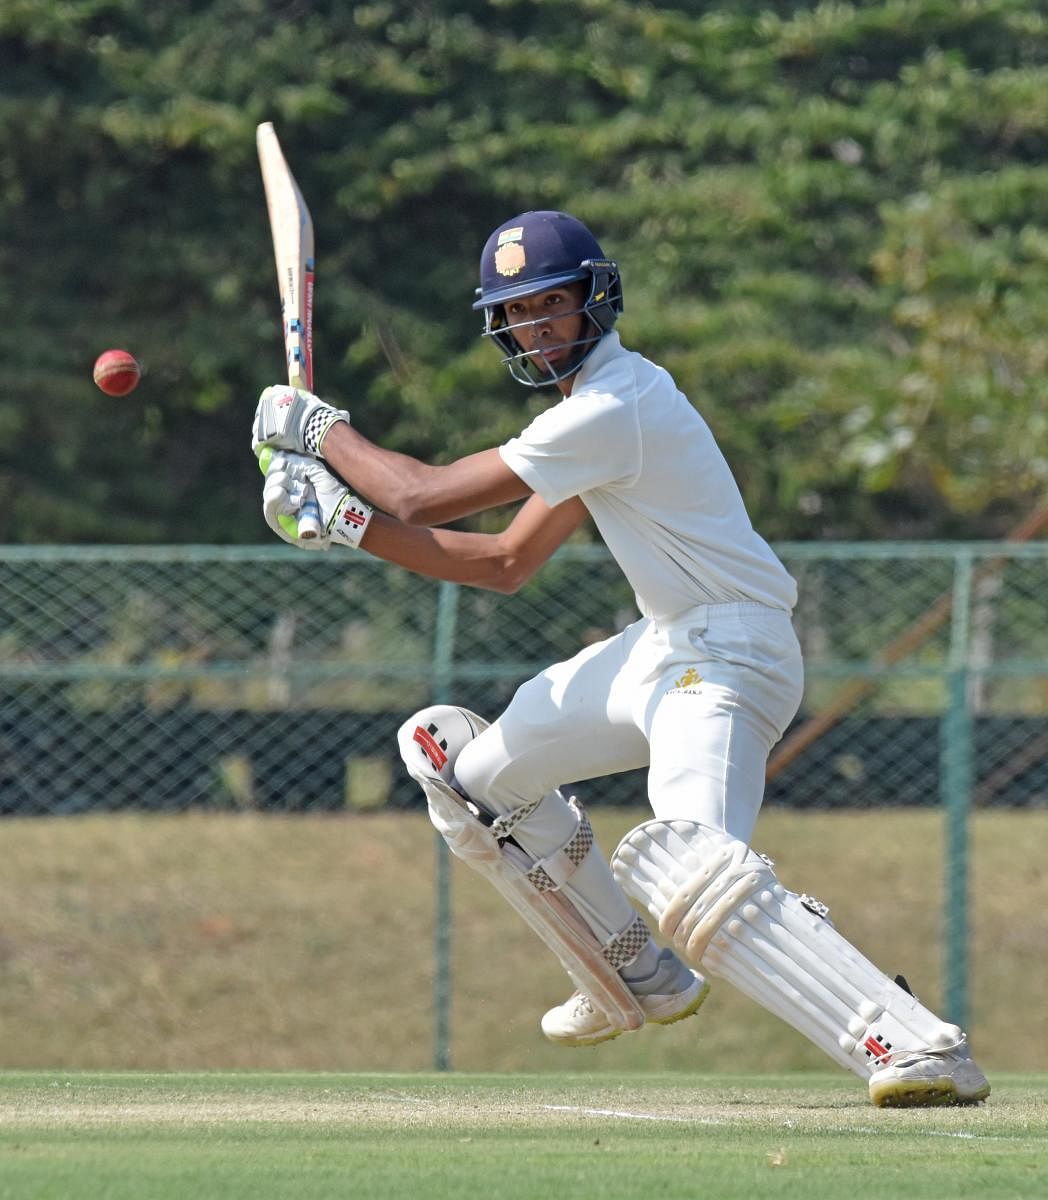 Devdutt Padikal top-scored for Karnataka with a patient 78 against Tamil Nadu in their opening Ranji Trophy game in Dindigul on Monday. DH File Photo